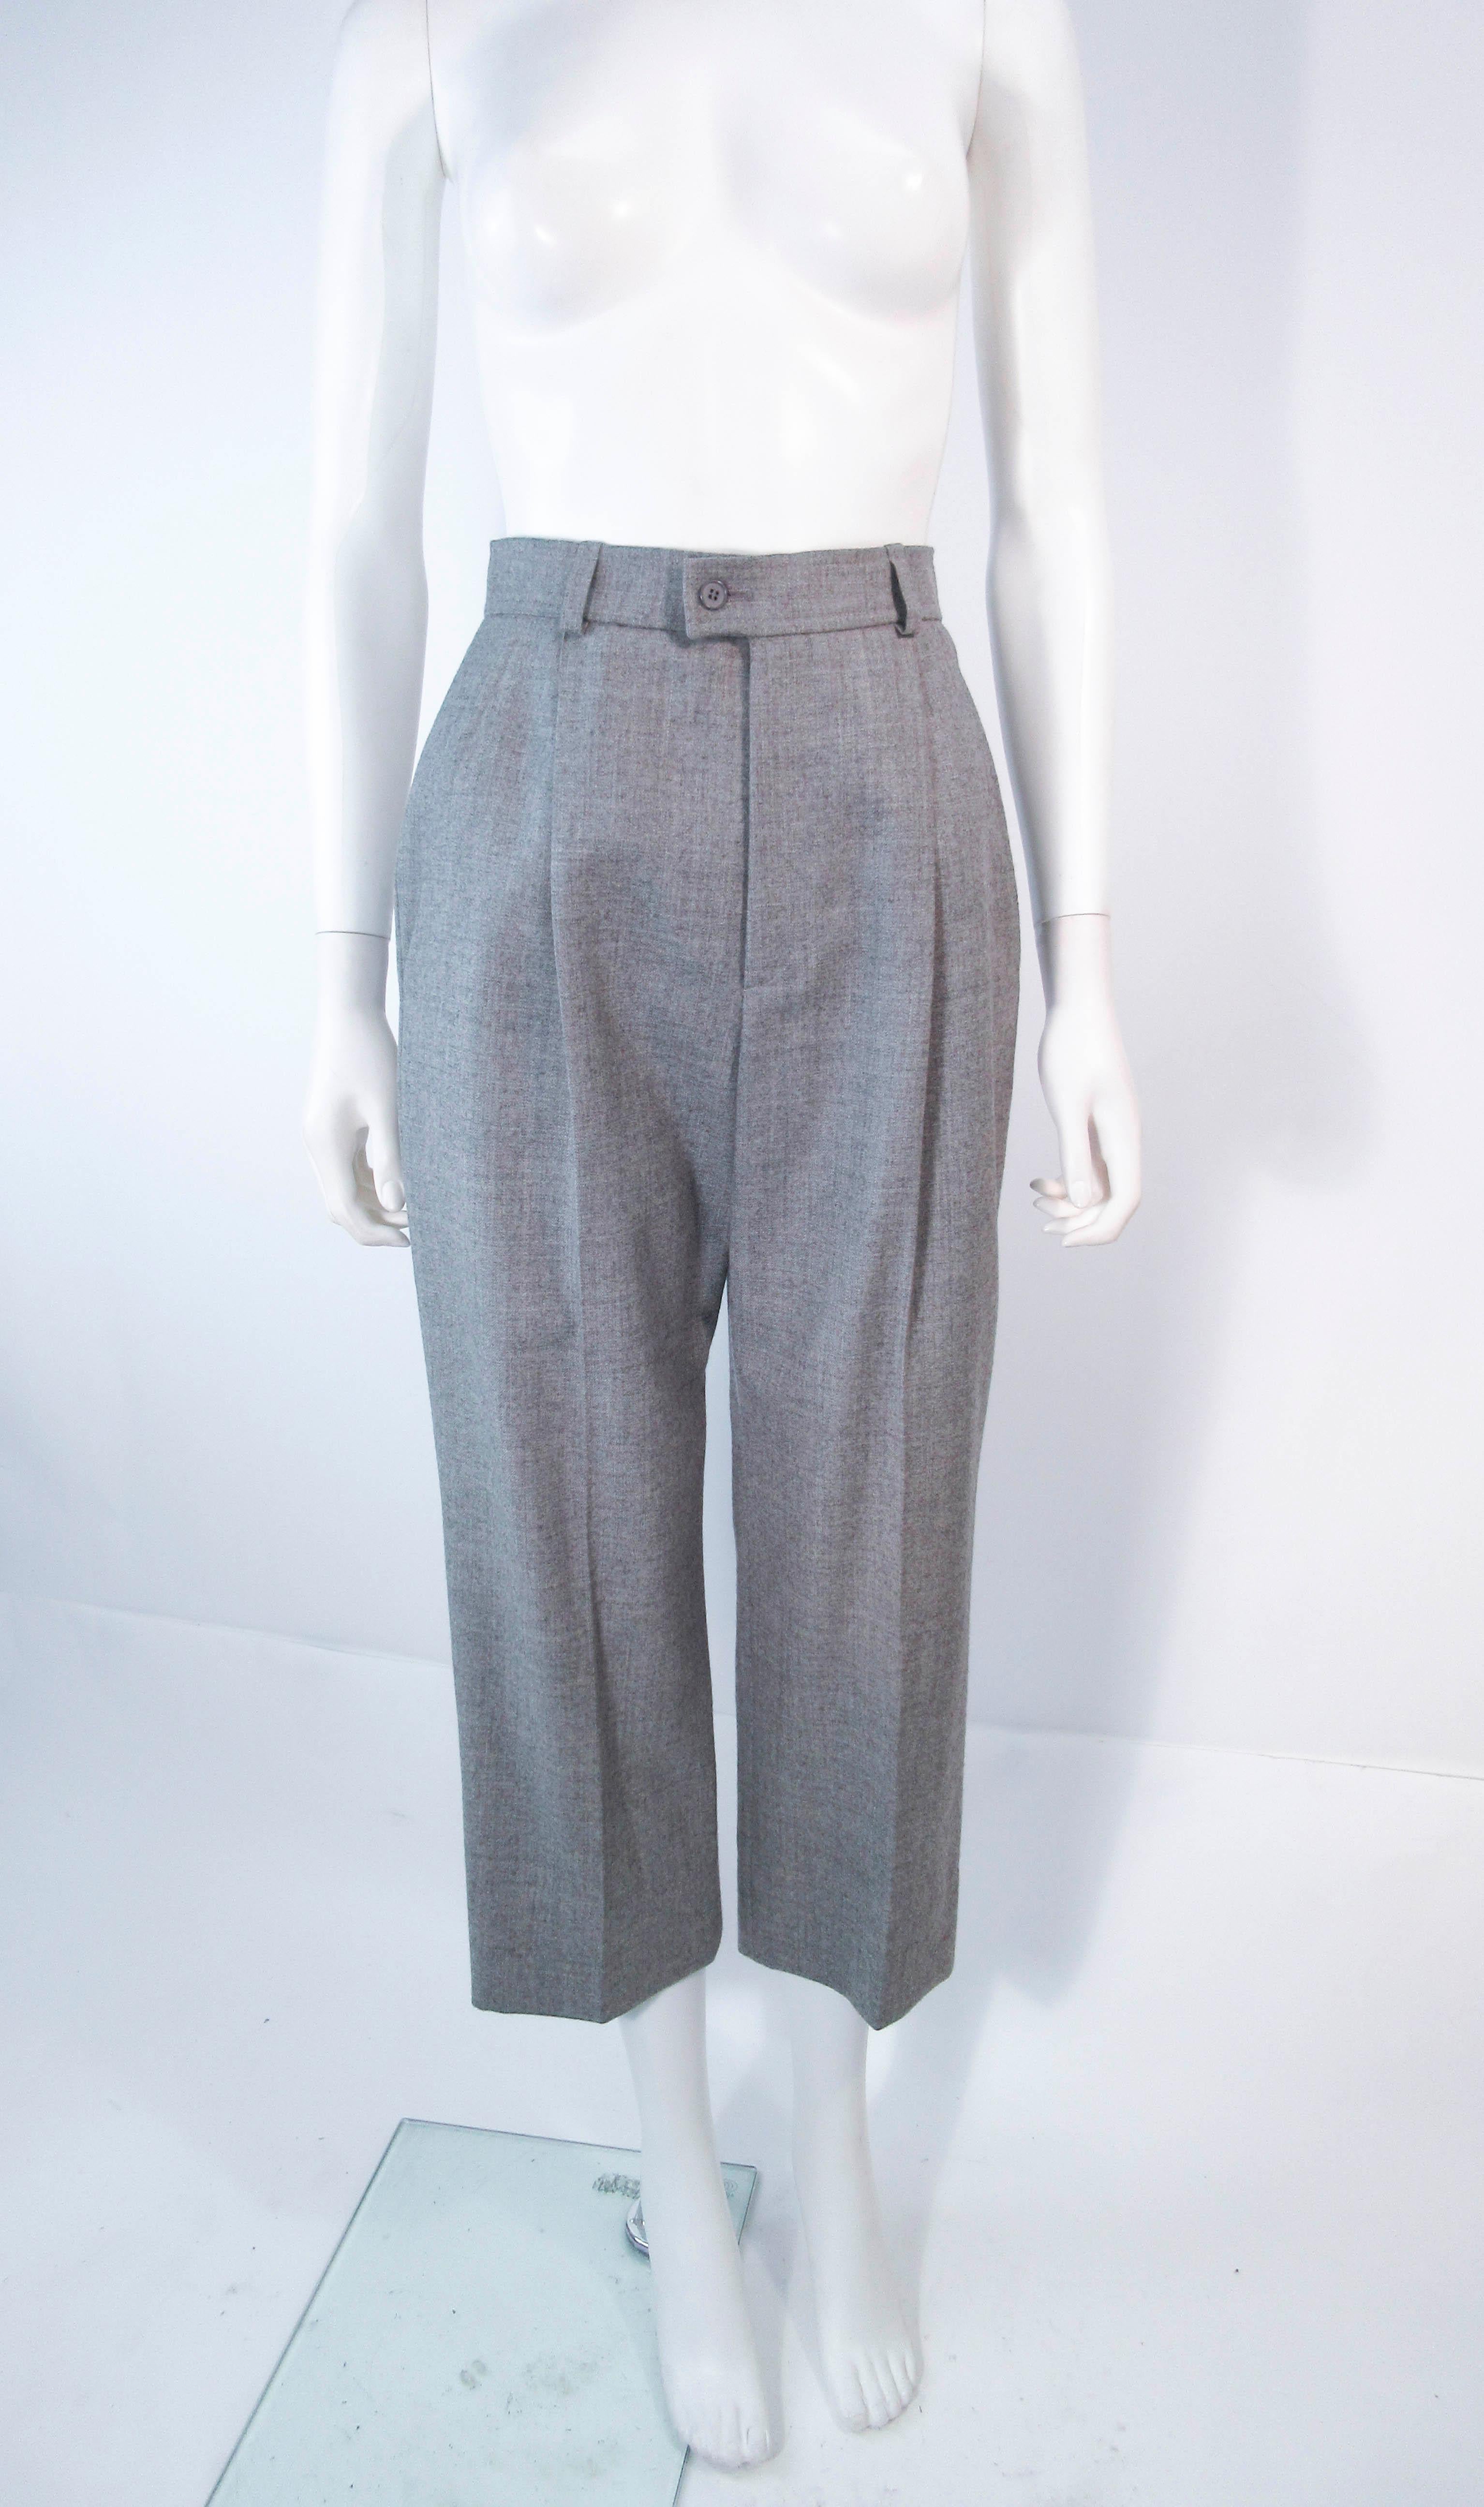 YVES SAINT LAURENT Grey Wool Pinstripe Cropped Trouser Set Size 40 For Sale 13